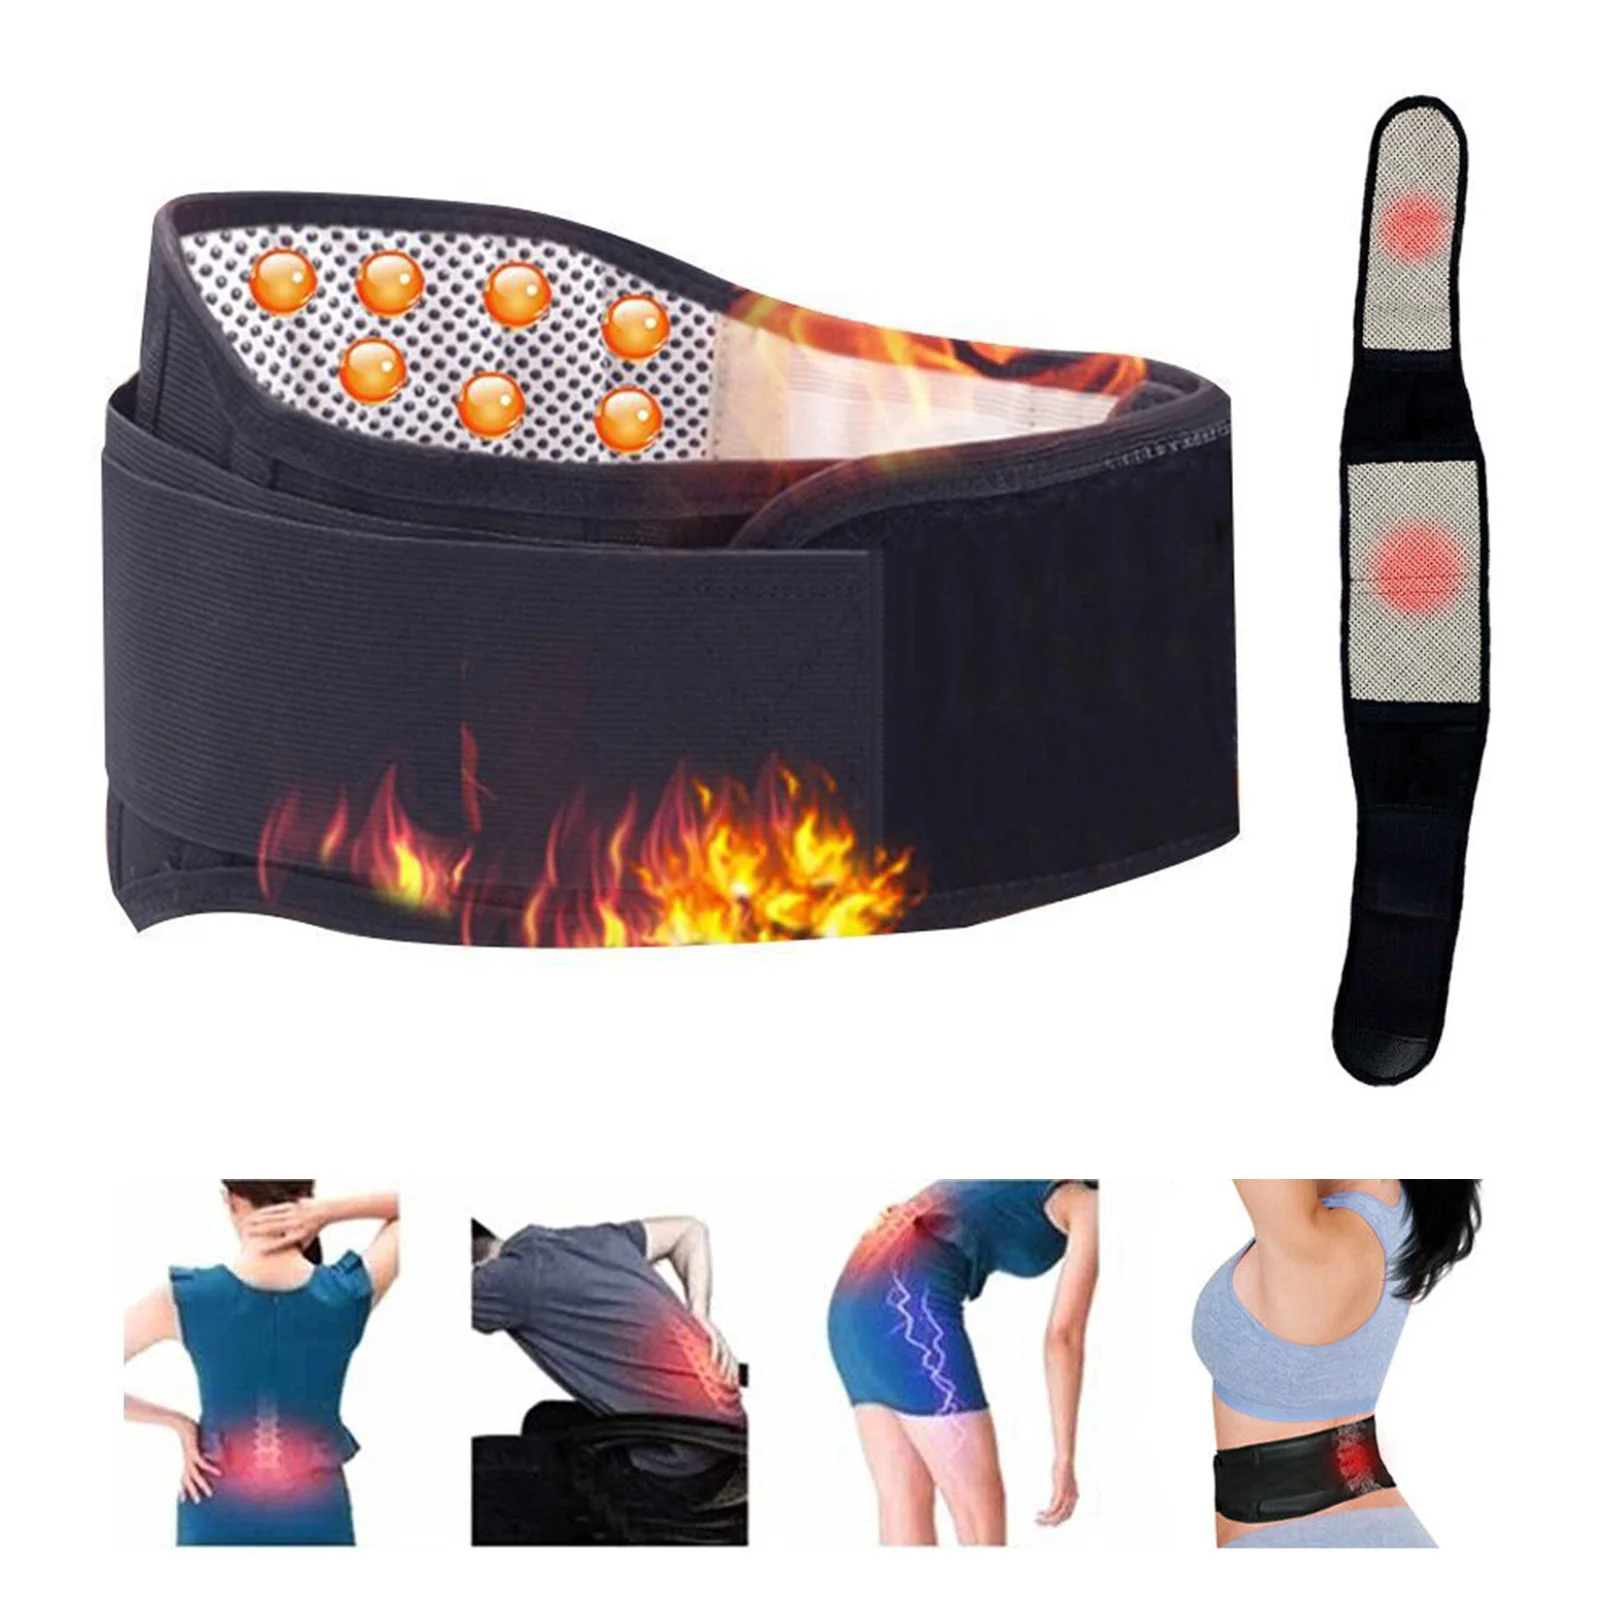 

Lower Back Brace Support Belt Therapy Waist Belt with Breathable Mesh for Arthritis Joint Pain Relief Injury Recovery